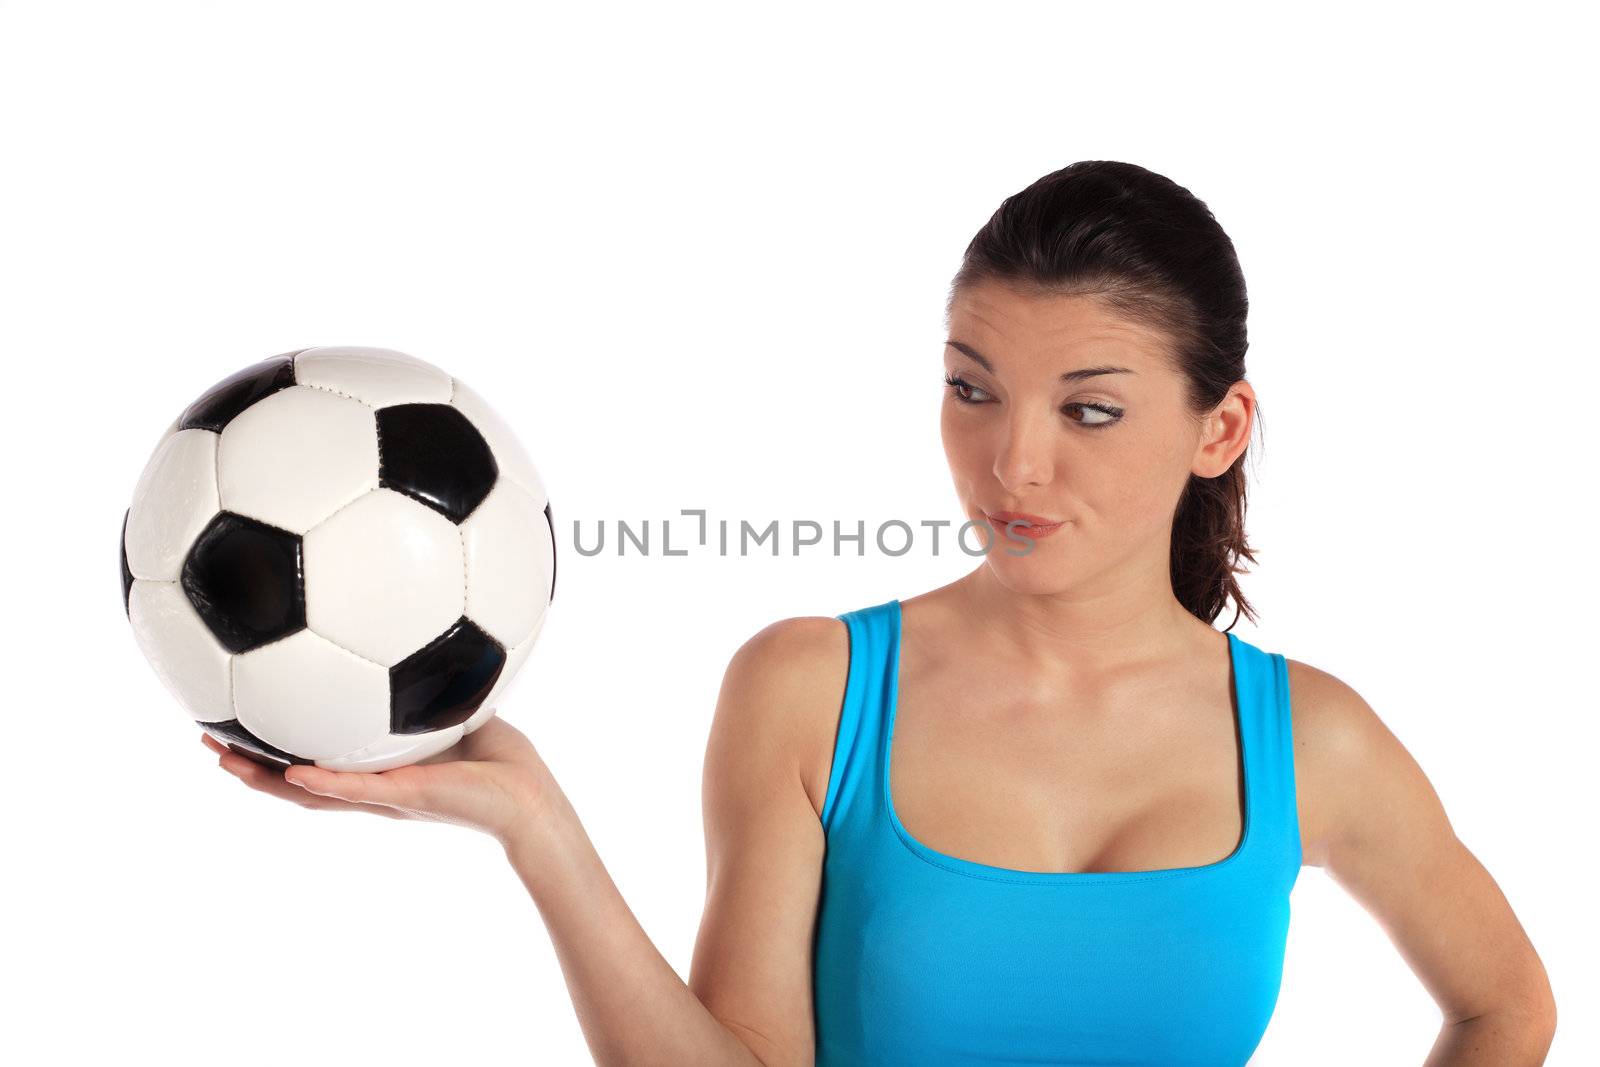 Frustrated woman holding soccer ball. All on white background.